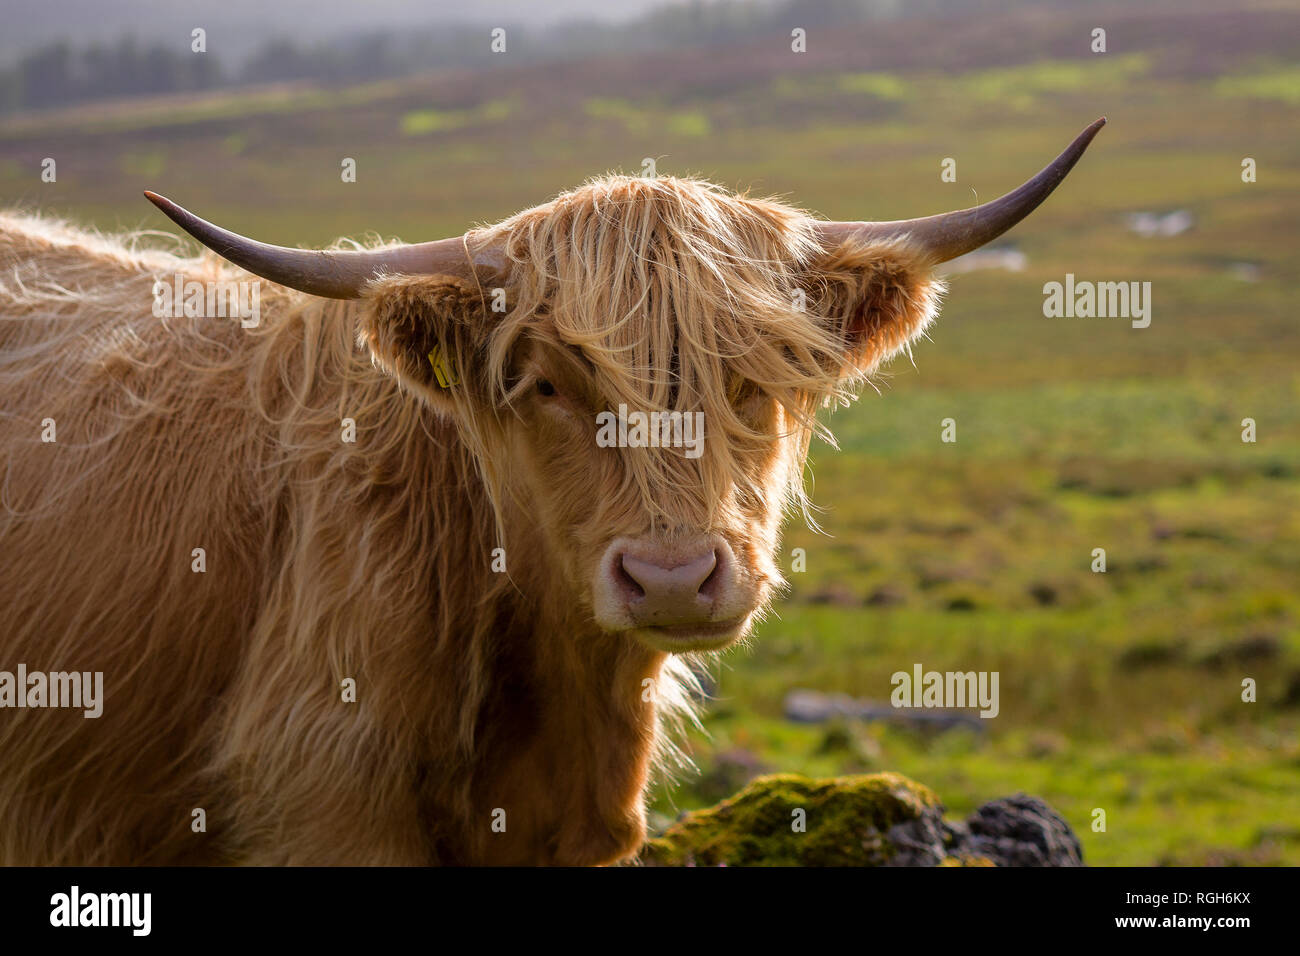 A close up head shot of a Scottish Highland cow in evening light Stock Photo